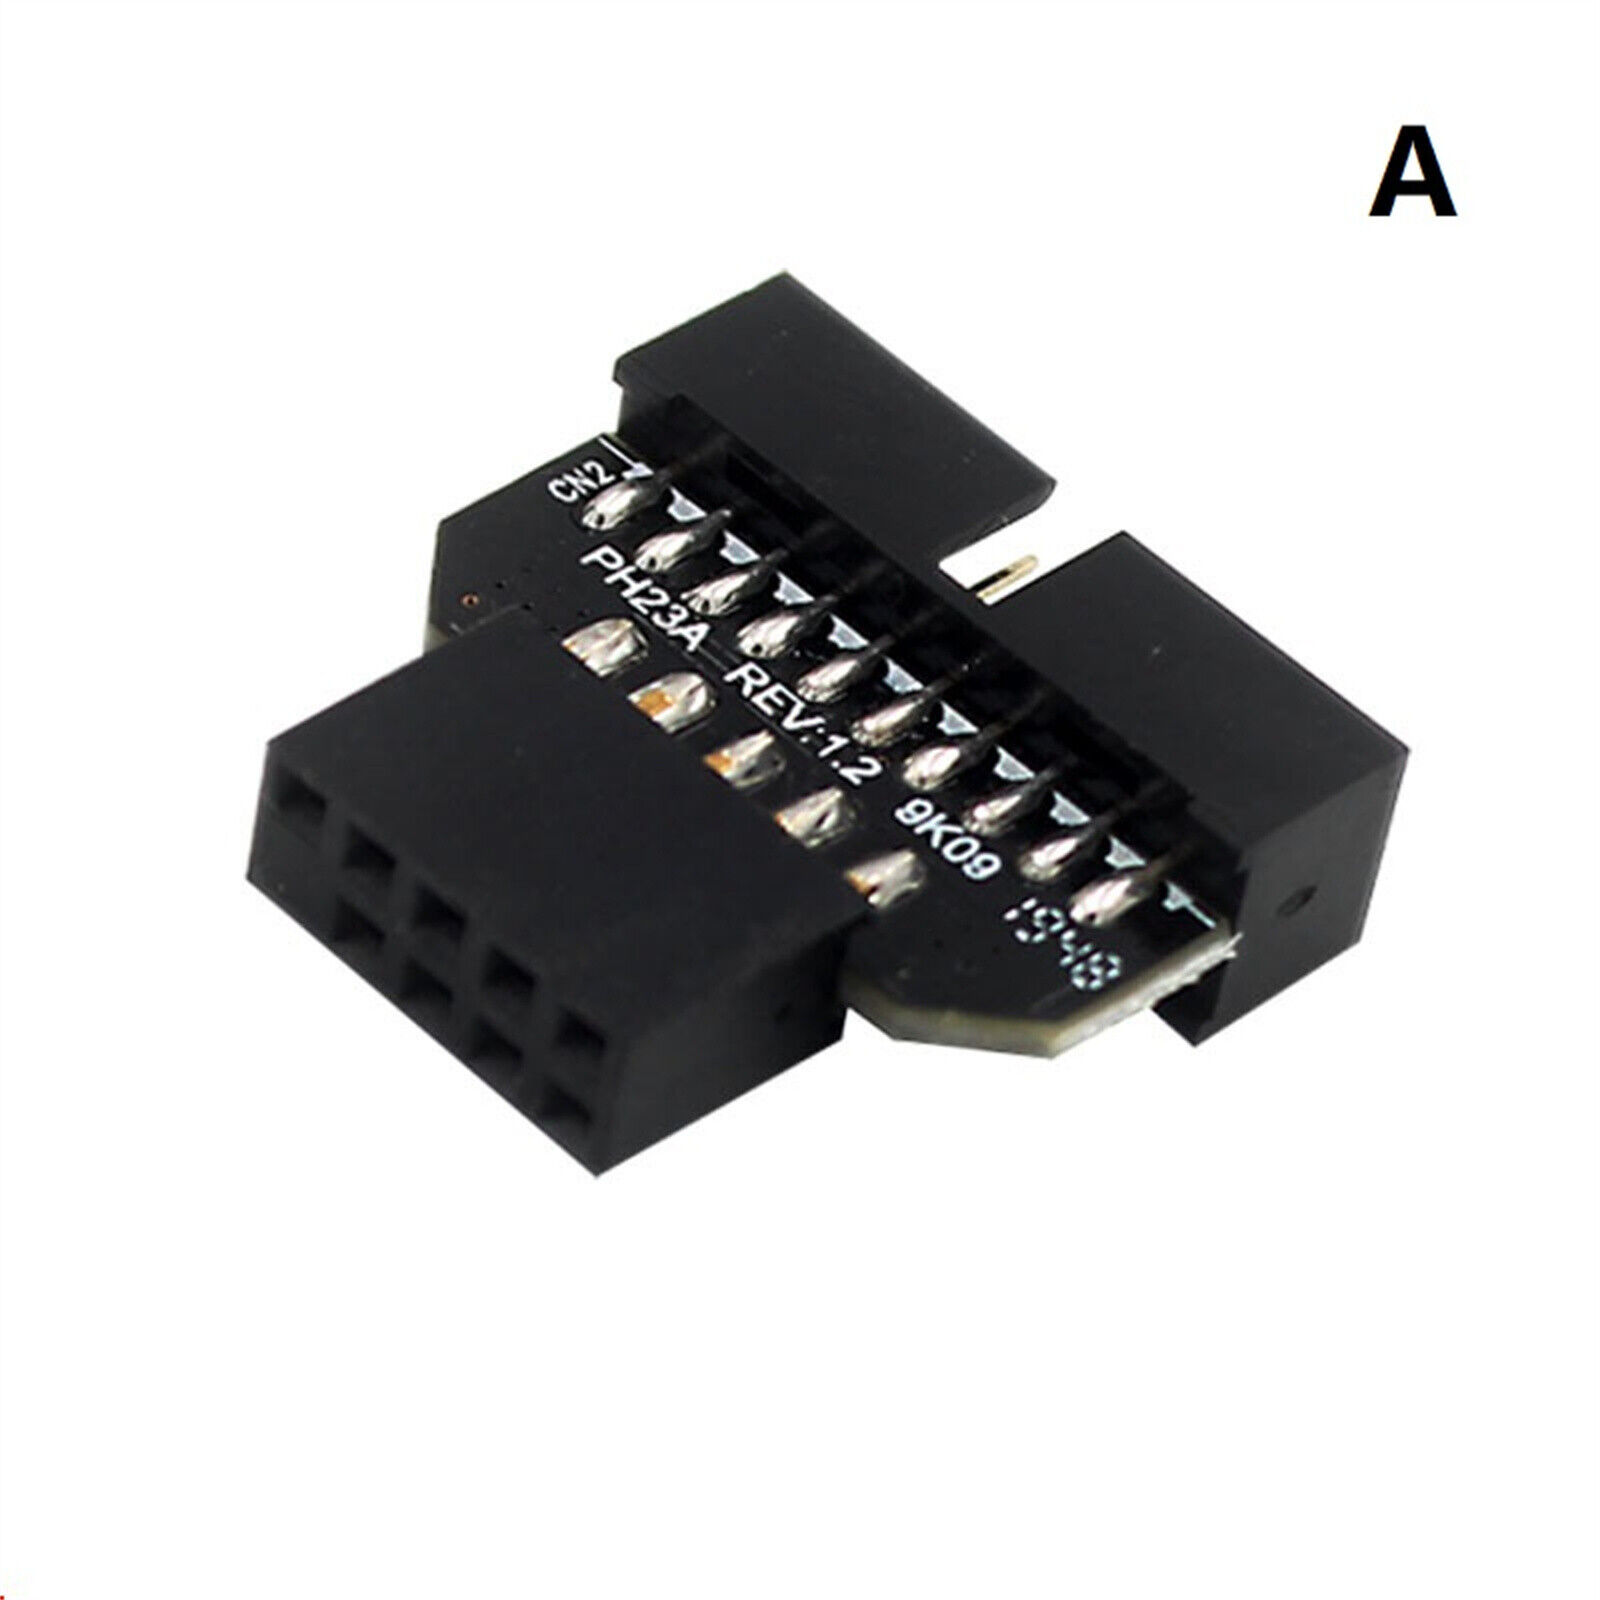 Front Panel Plug Connector USB3.0 19-pin To USB2.0 9-Pin Adapter For Mainboard